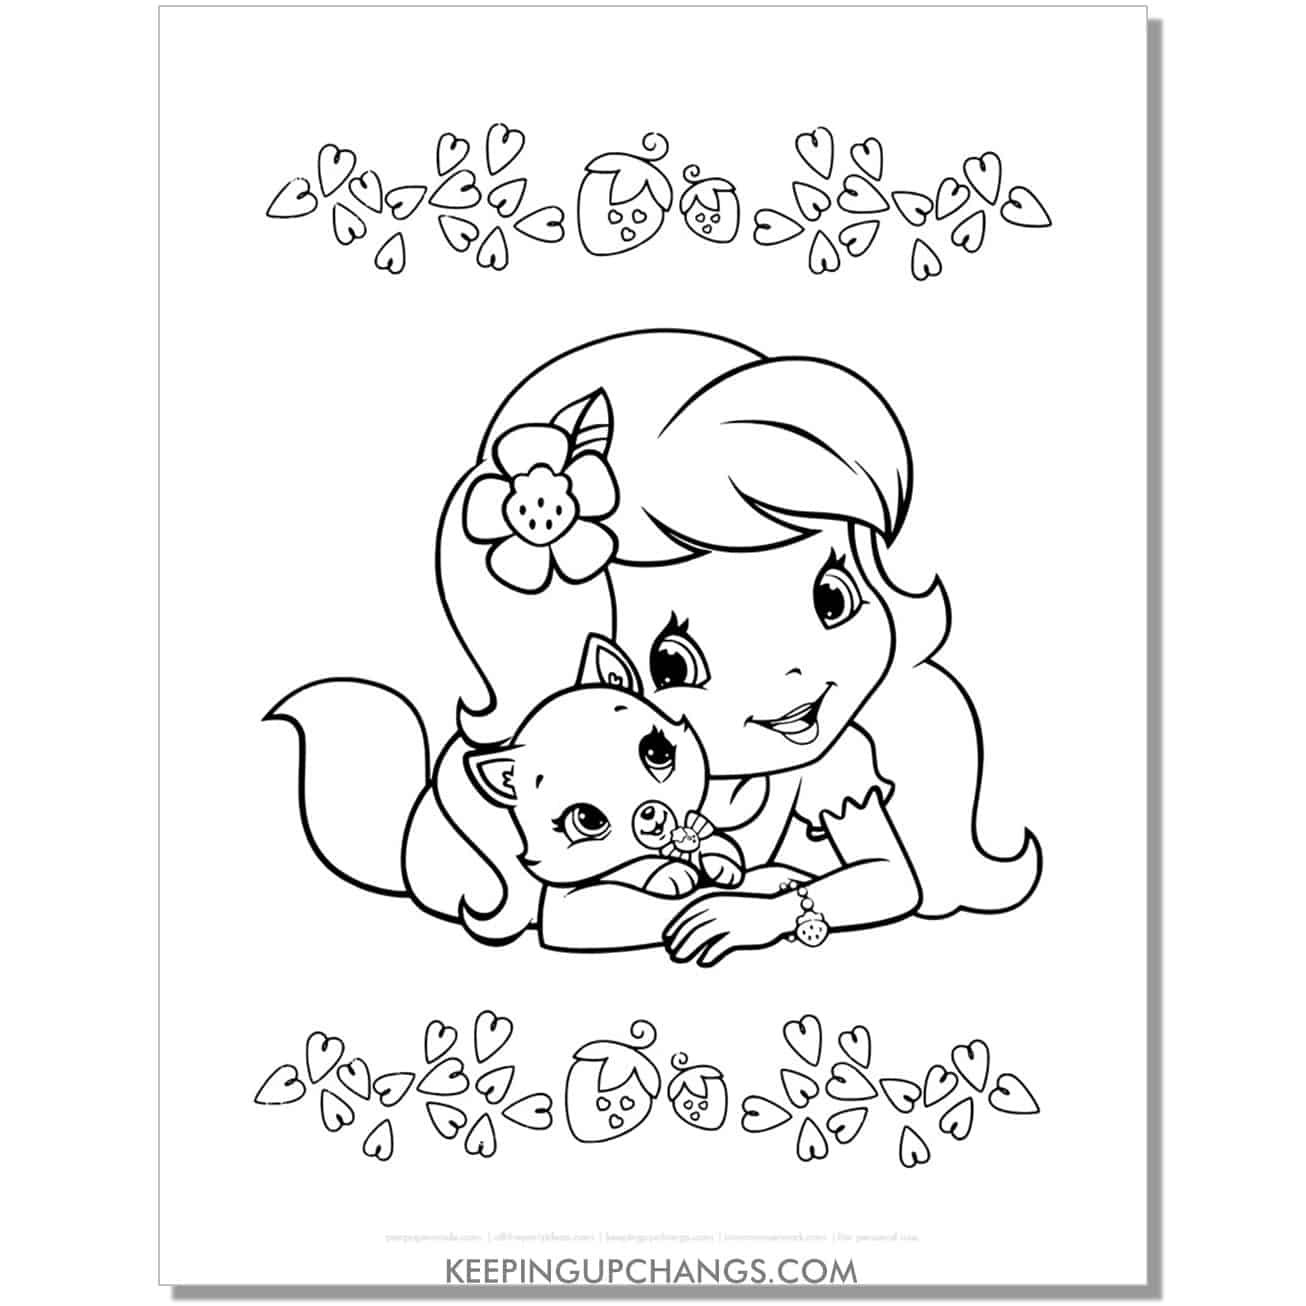 free strawberry shortcake with cat custard coloring page, sheet.